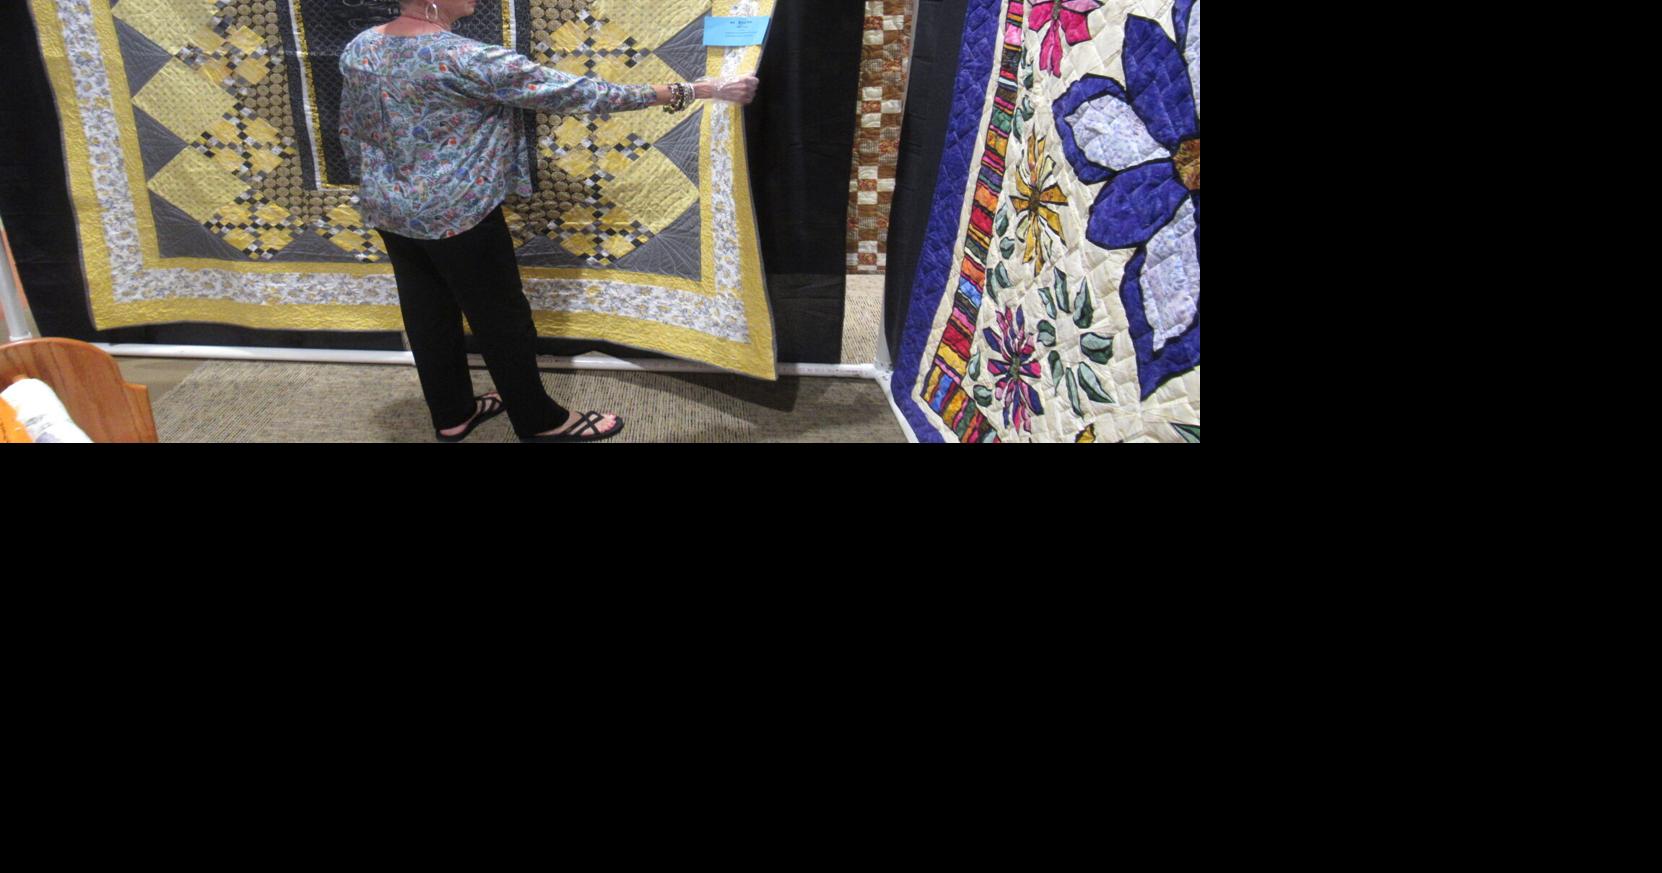 Quilt enthusiasts flock to Extension service for annual show, Local News